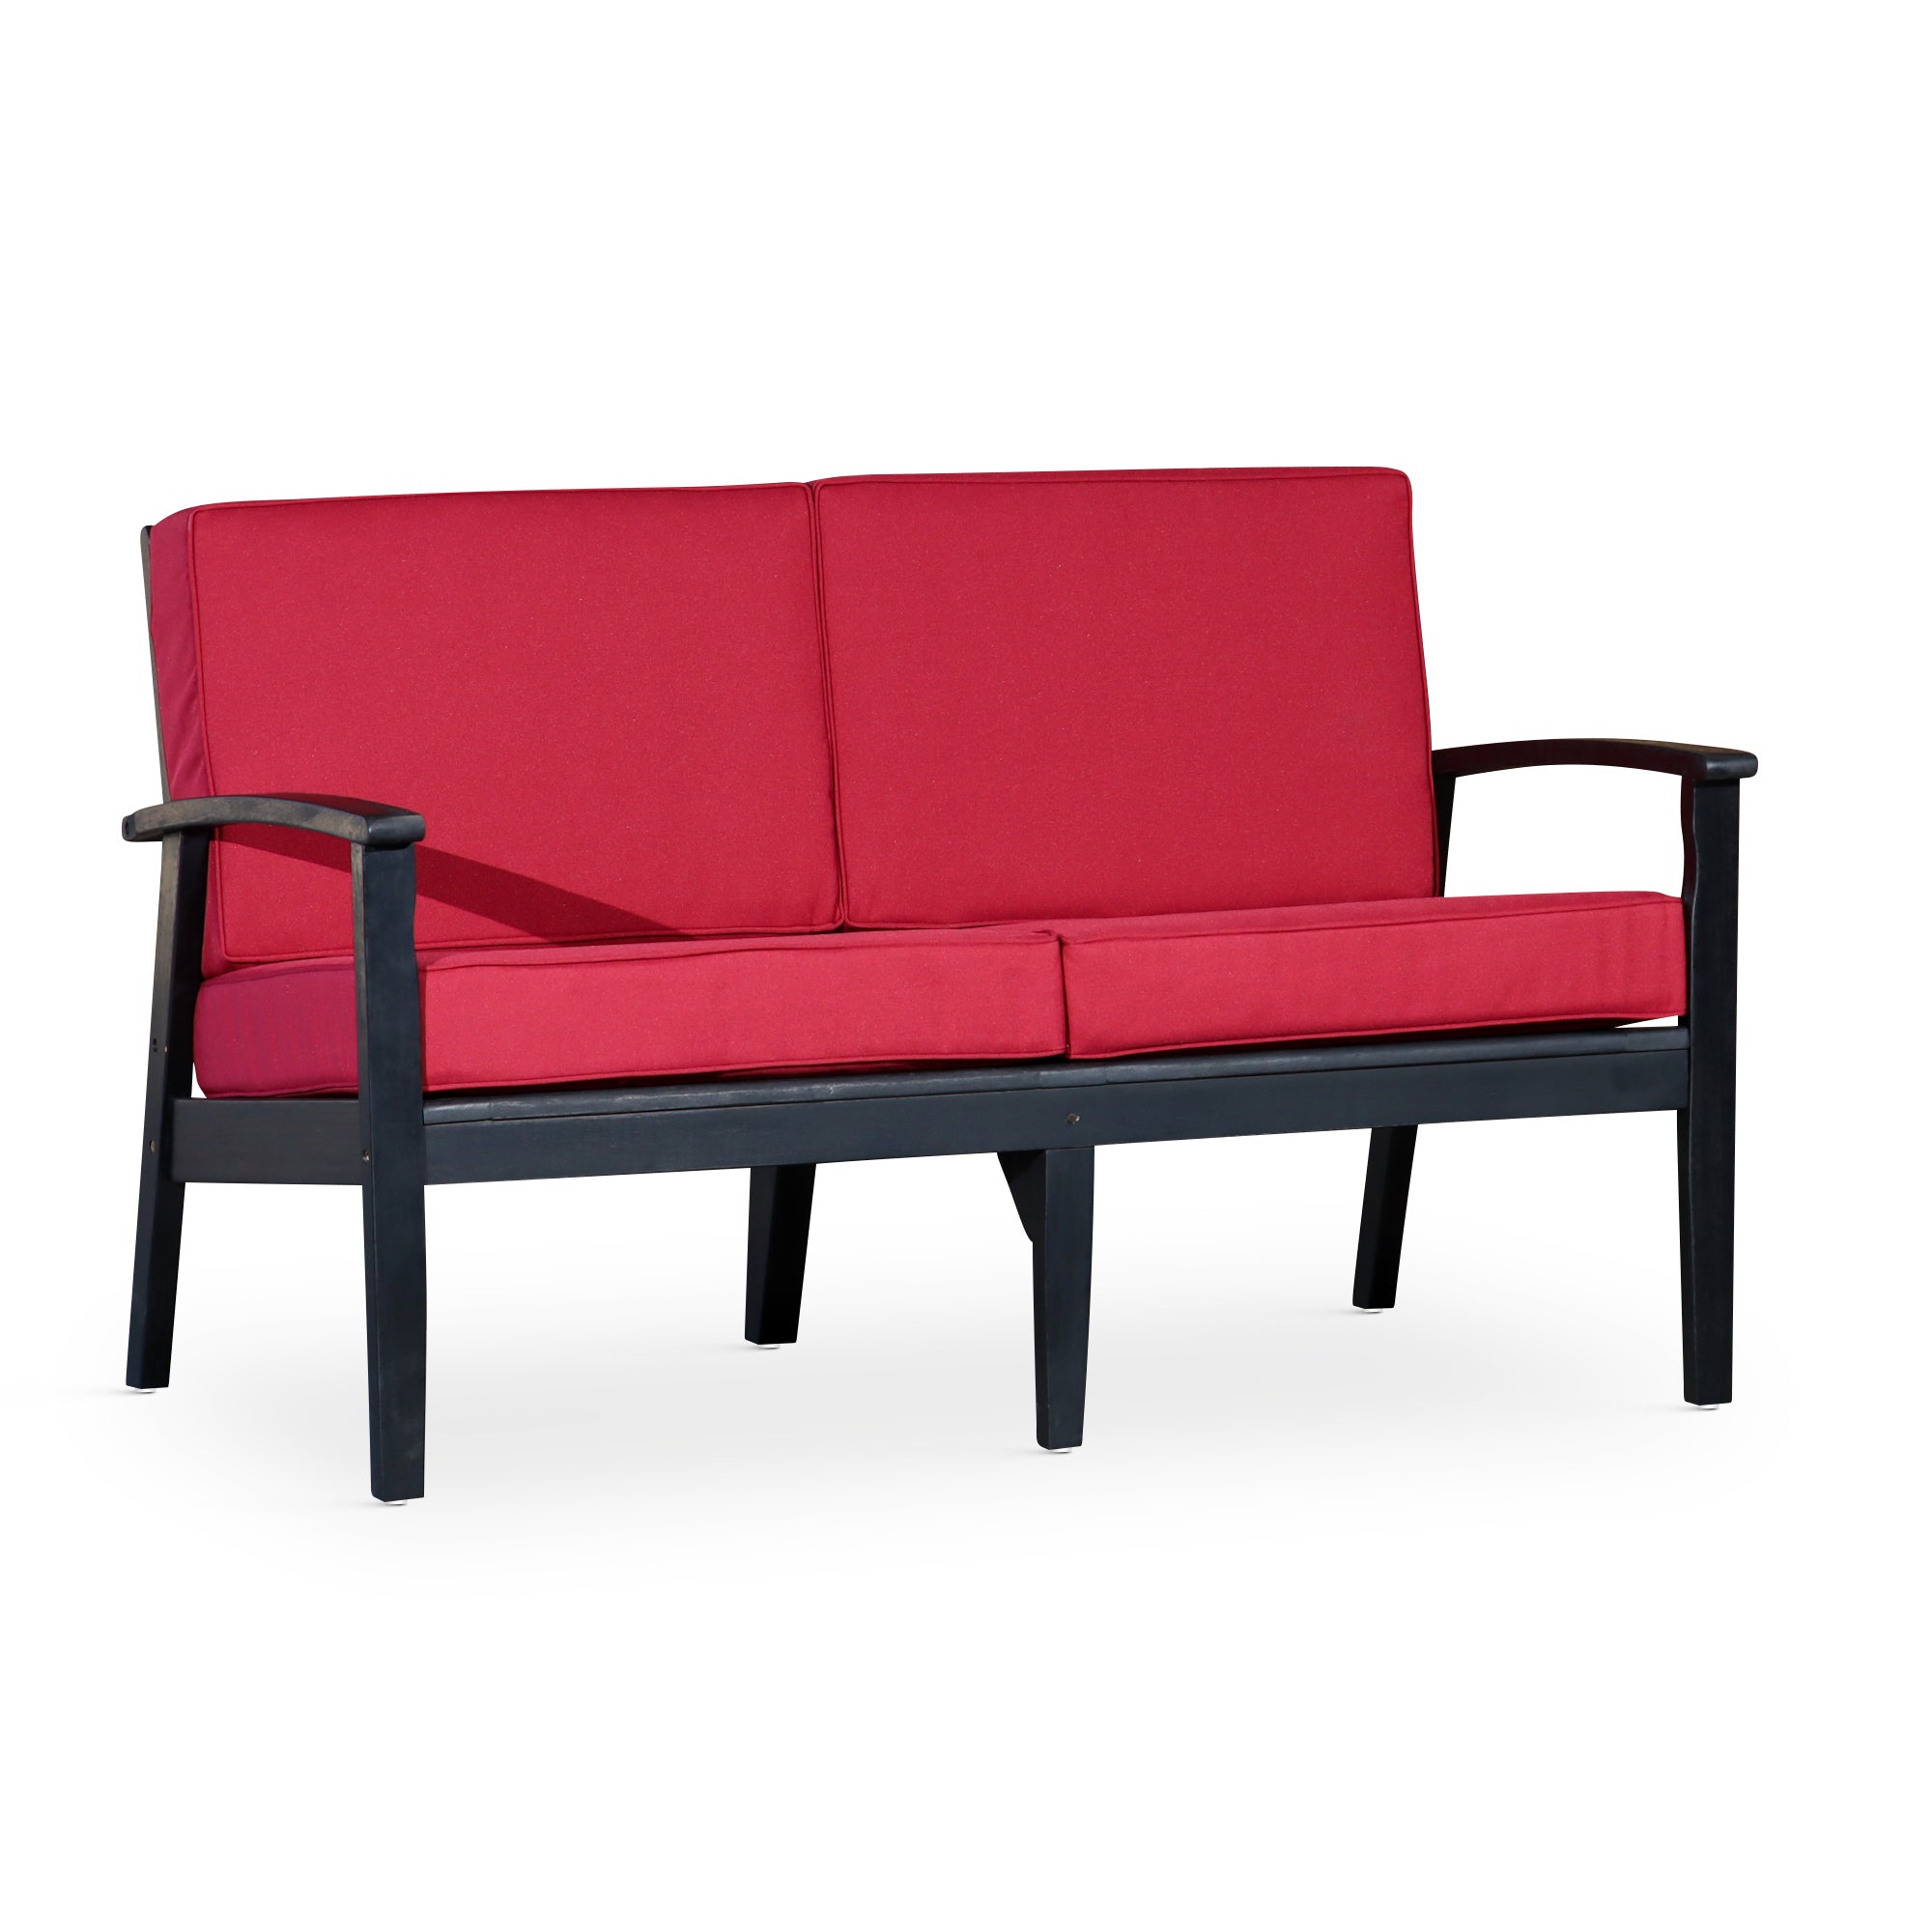 Outdoor-Loveseat-with-Cushions-Espresso,-Burgundy-Outdoor-Chairs